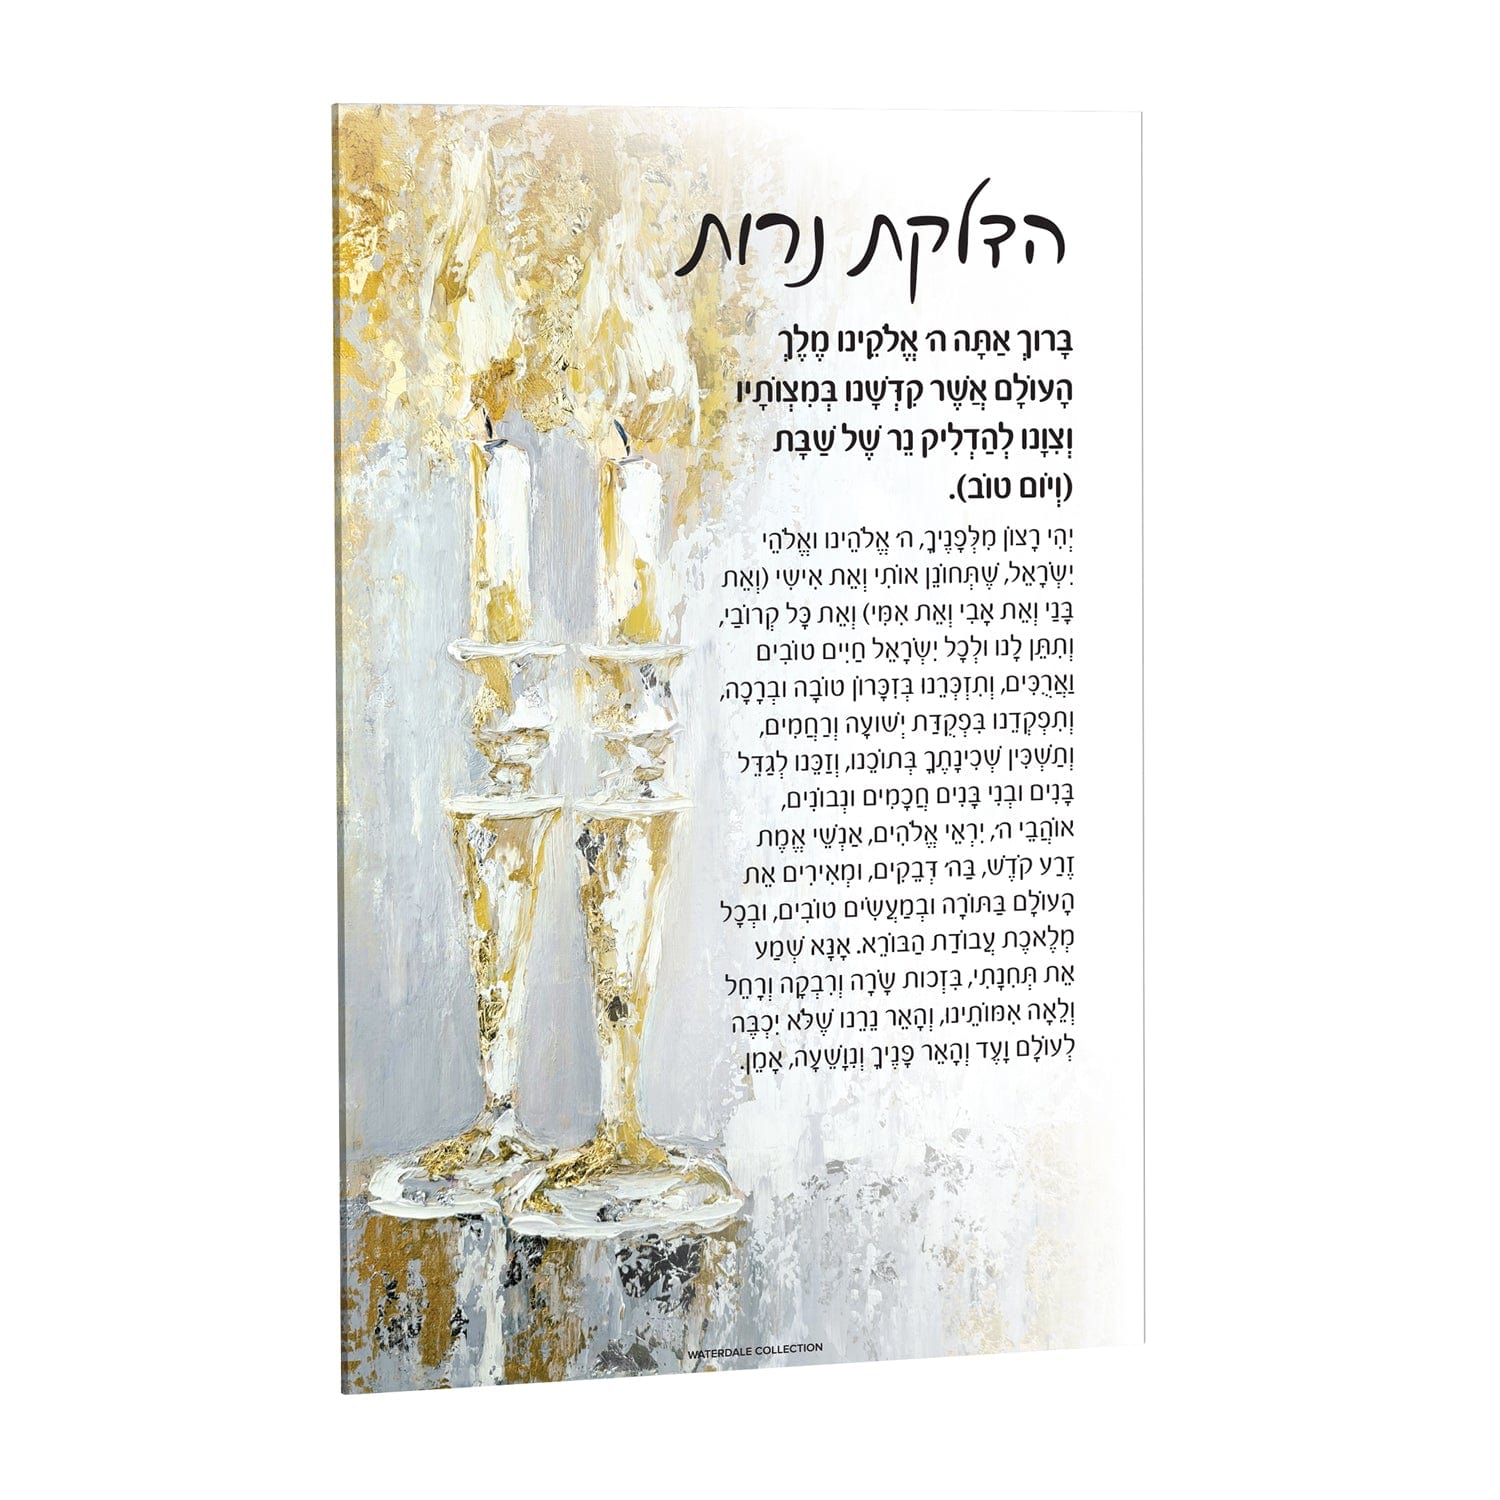 Painted Gold Candles Hadlokas Neiros Card - Waterdale Collection